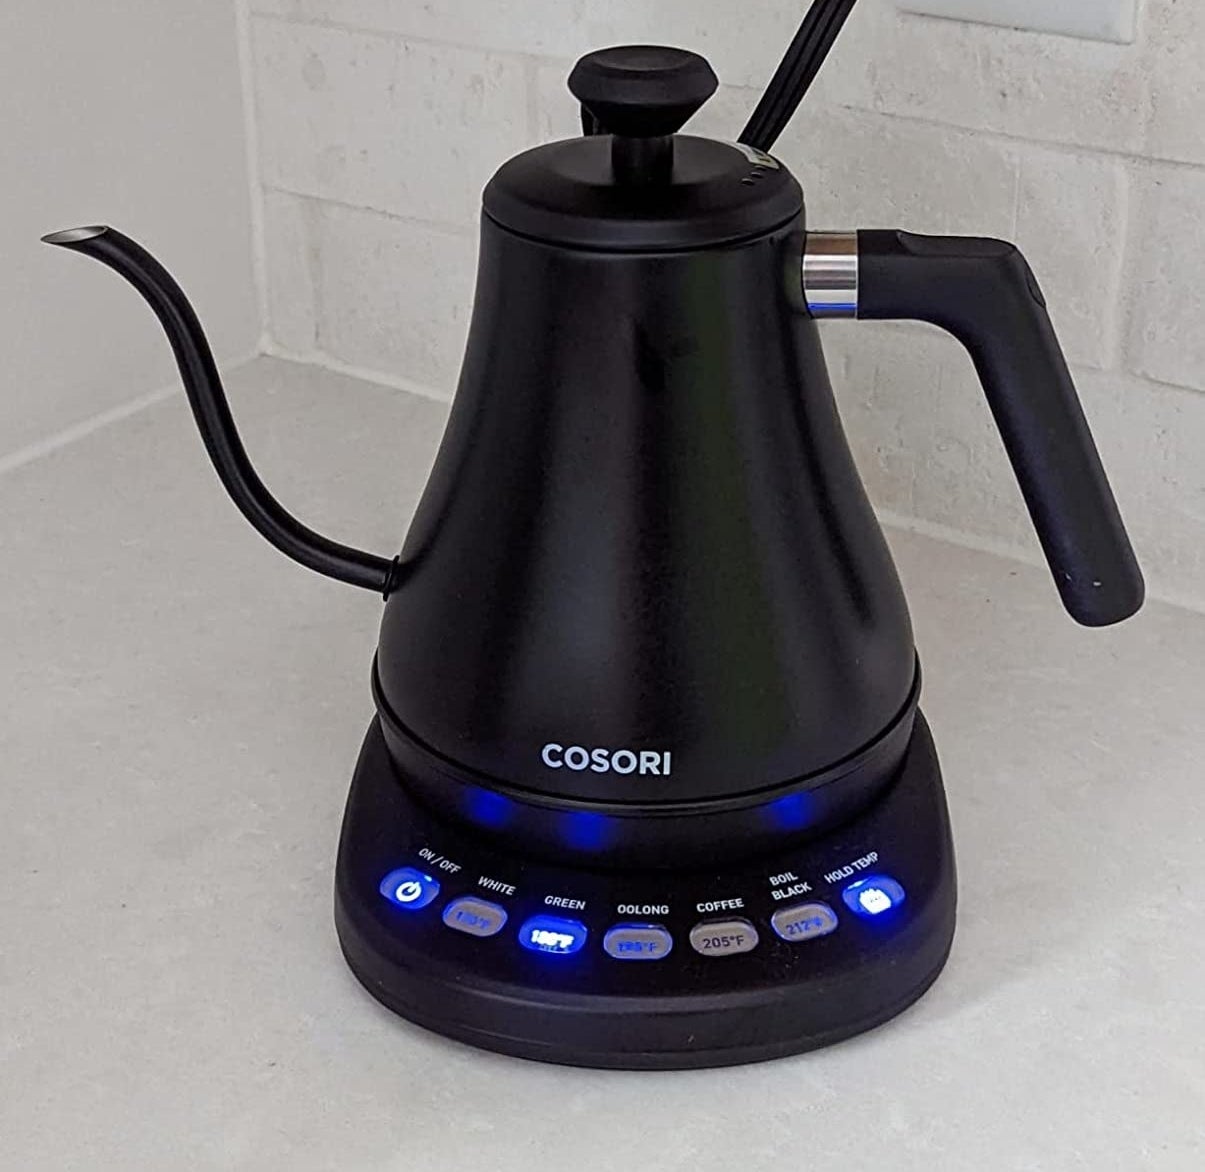 Reviewer image of black kettle on kitchen countertop